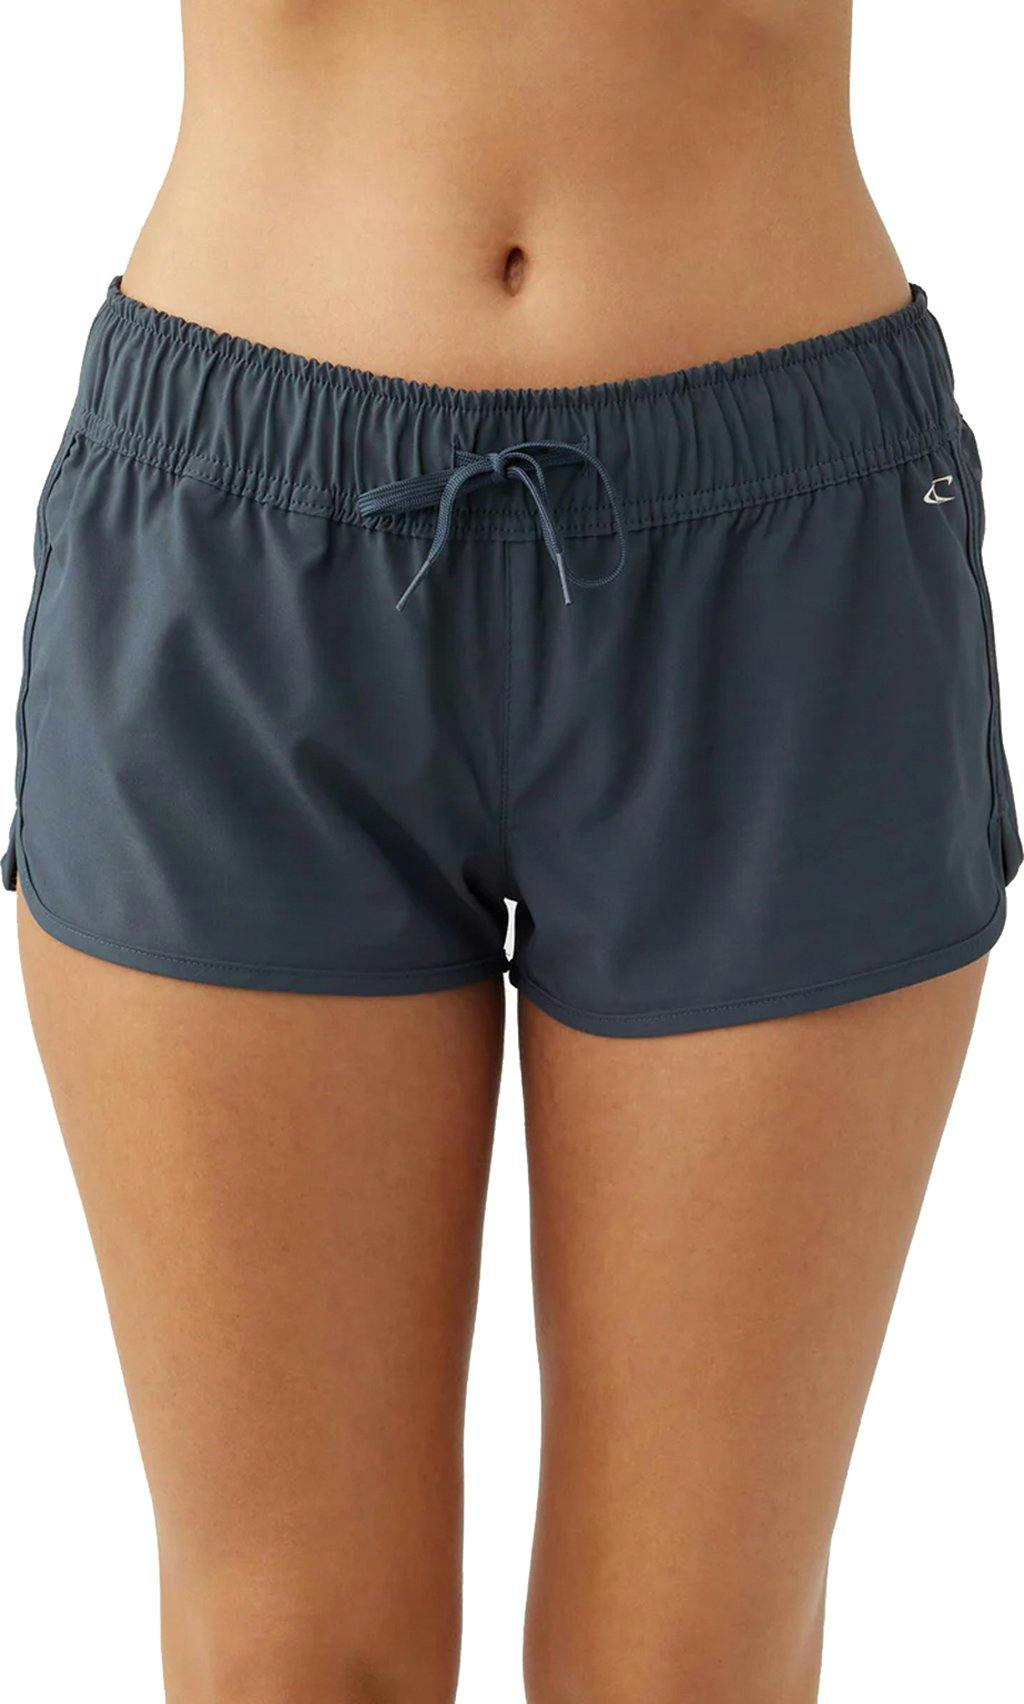 Product image for Laney 2 In Stretch Boardshorts - Women's